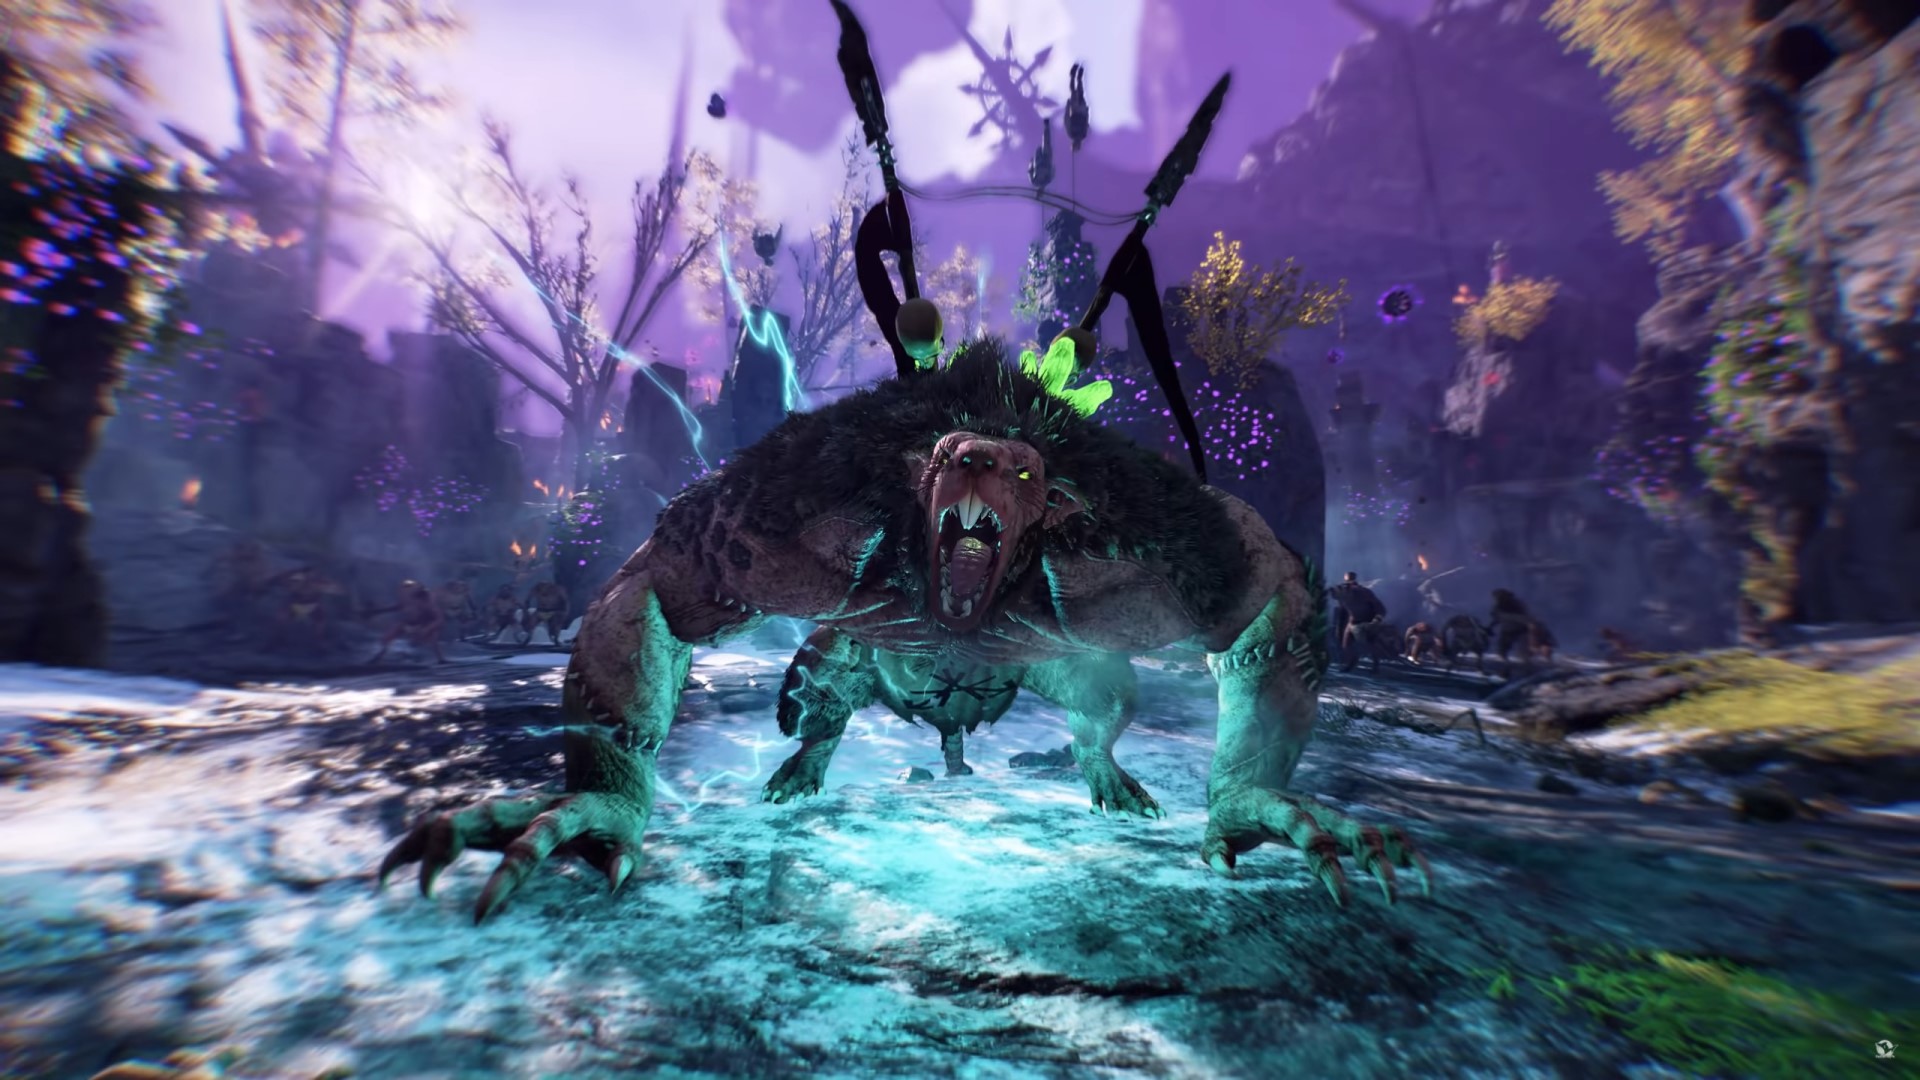 Vermintide 2’s Chaos Wastes expeditions are getting tougher bosses